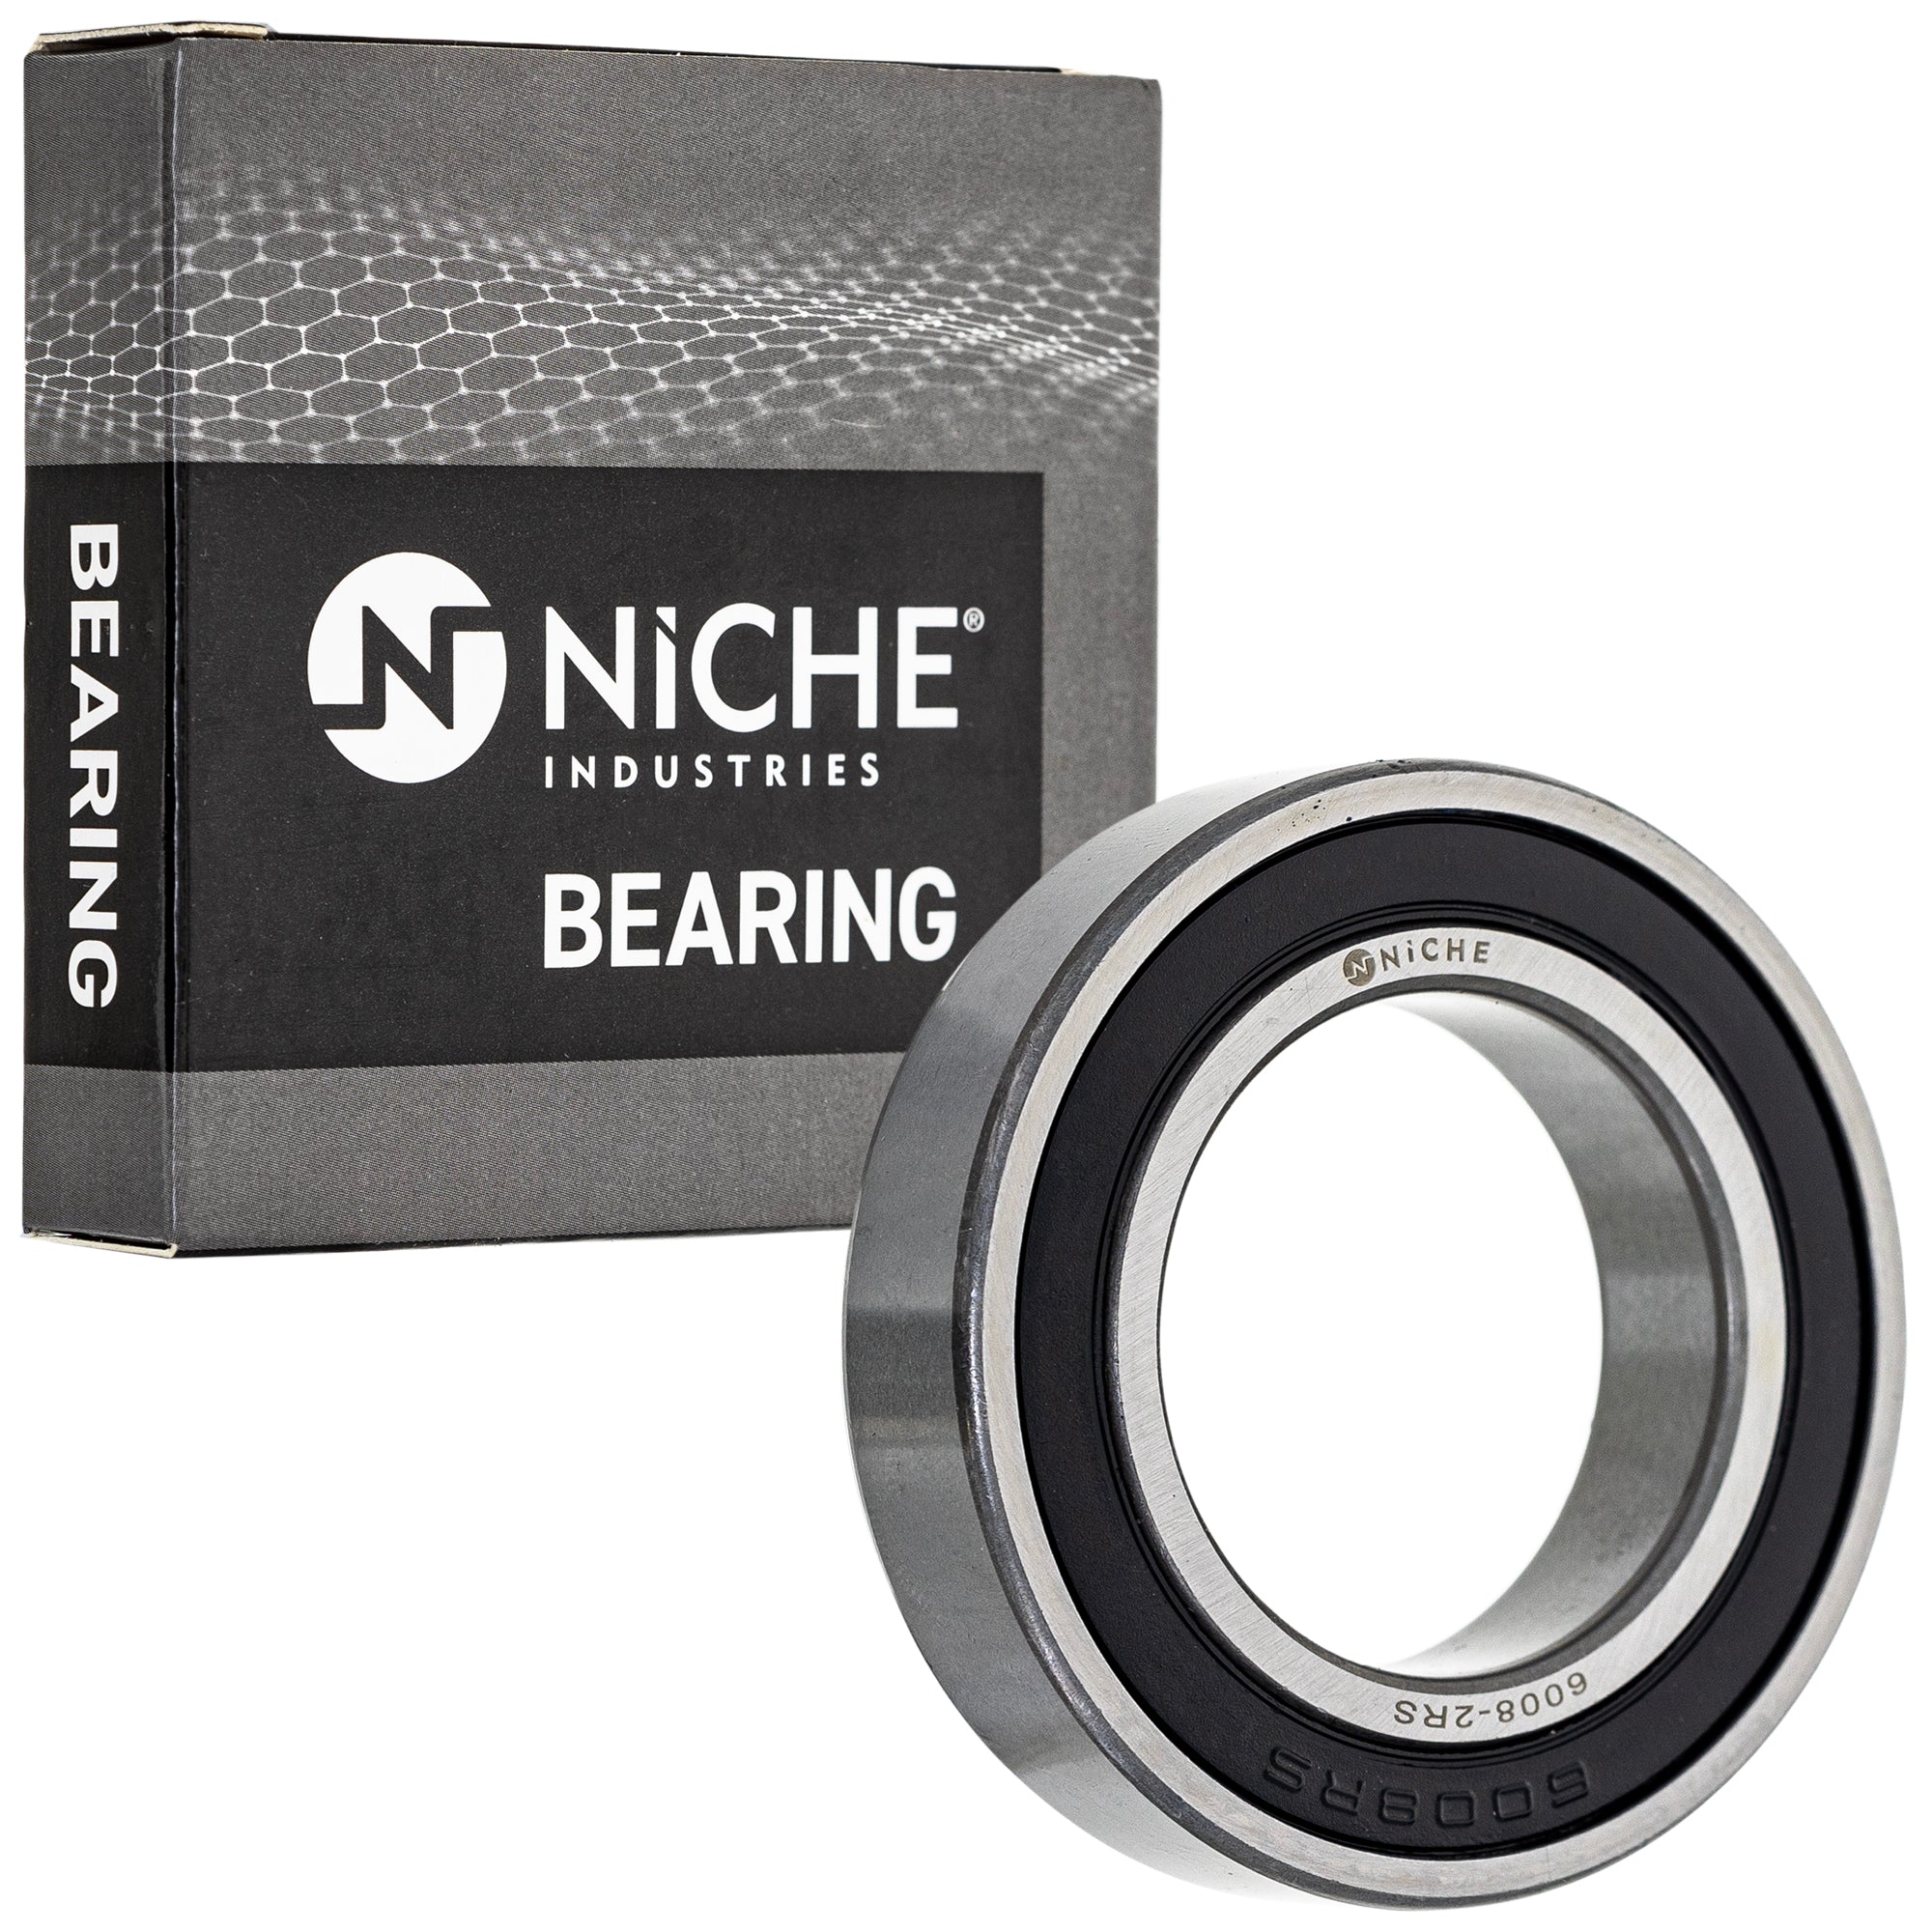 NICHE 519-CBB2253R Bearing 2-Pack for zOTHER Arctic Cat Textron